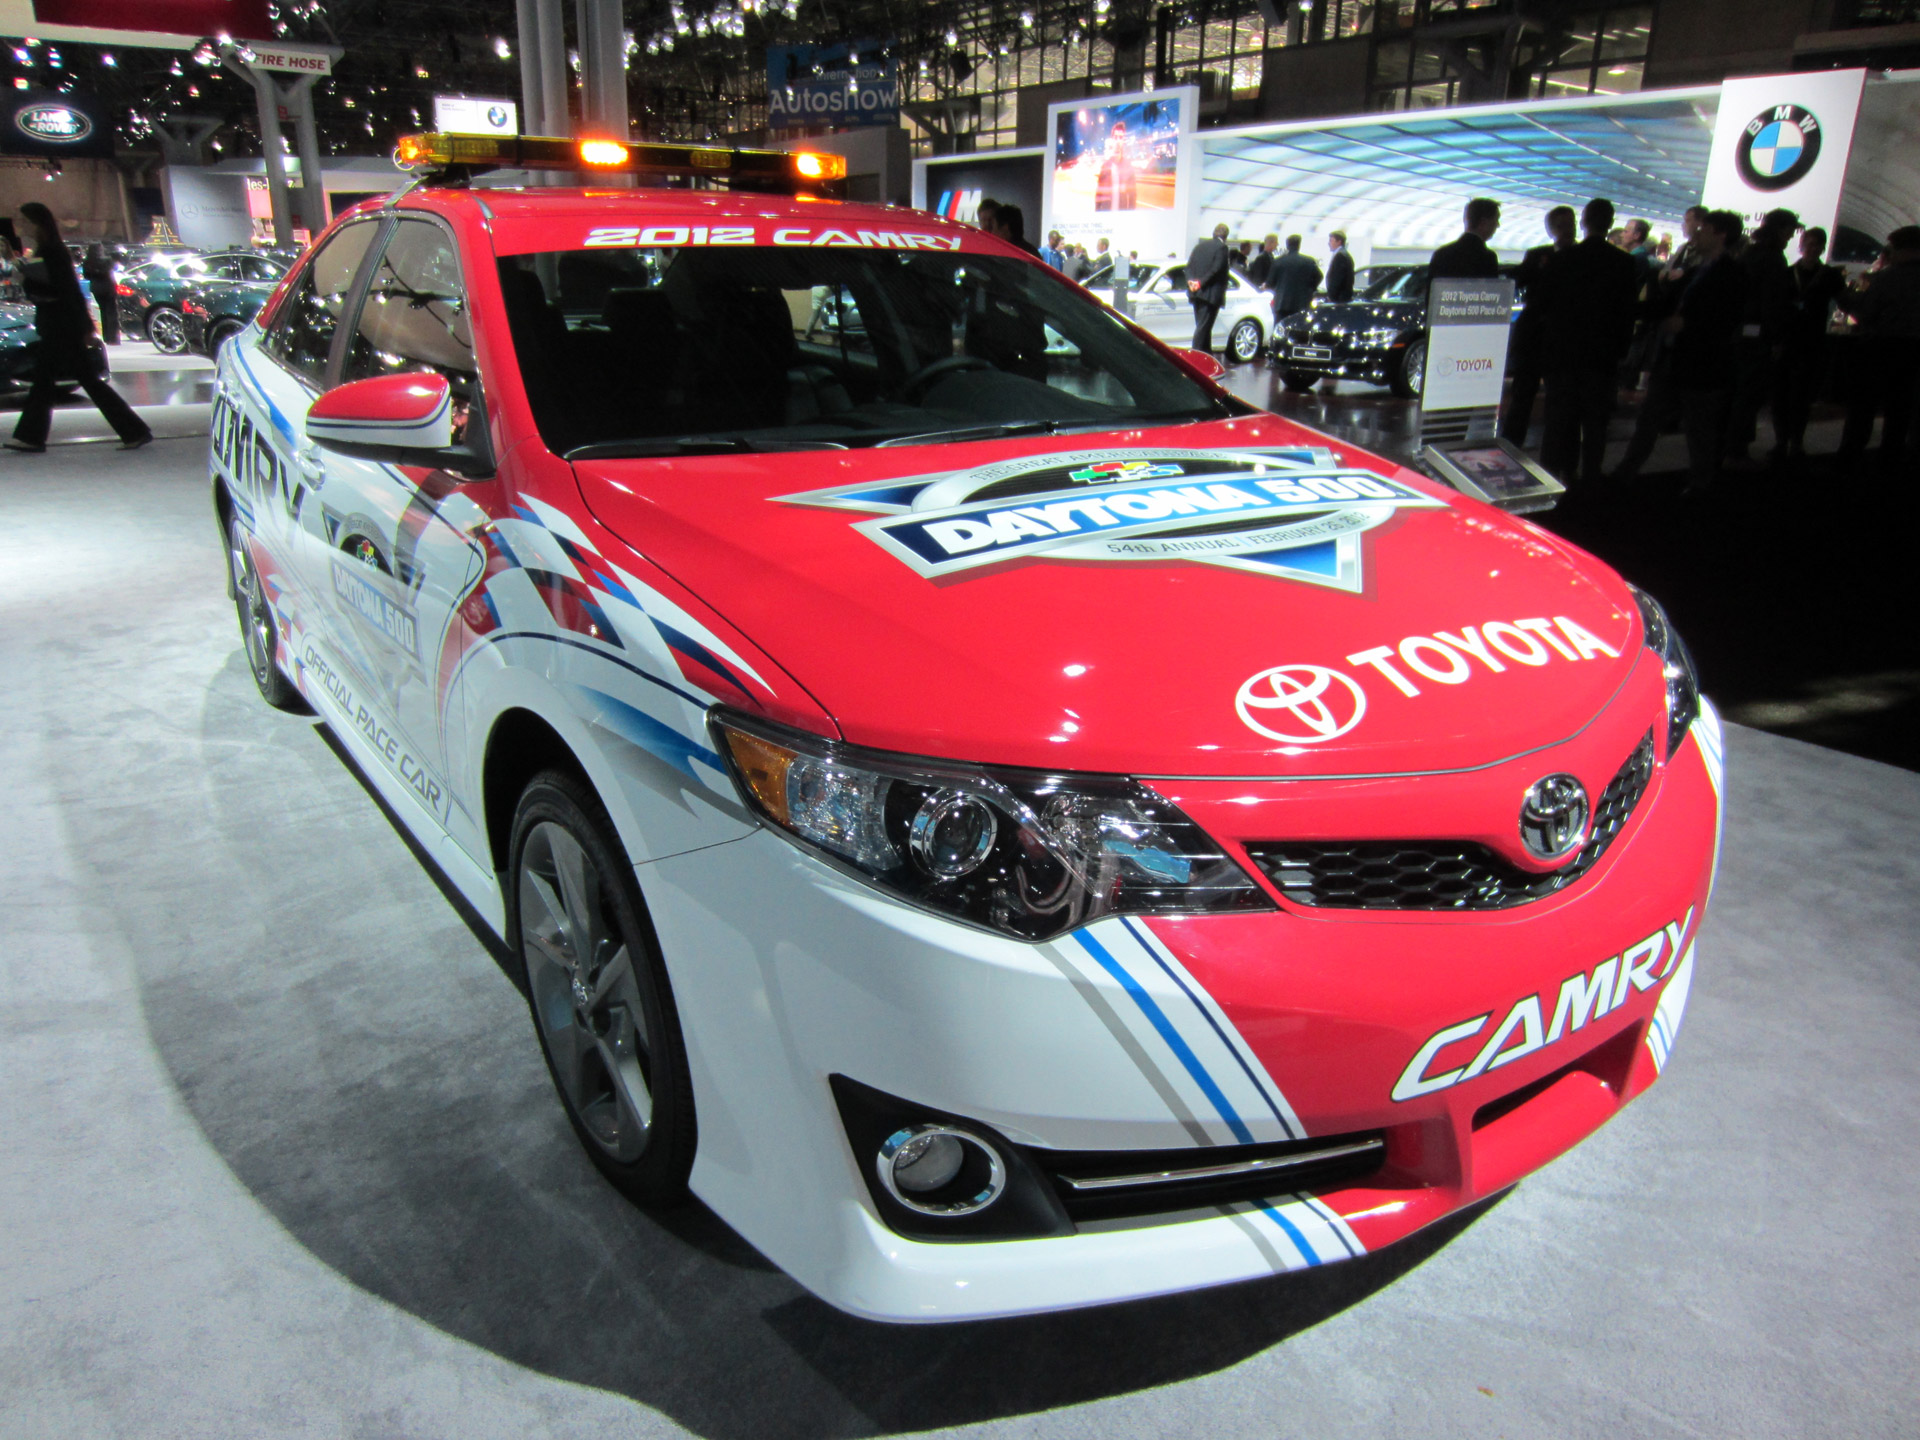 2012 toyota camry pace car 2012 toyota camry toyota camry pace car free photo